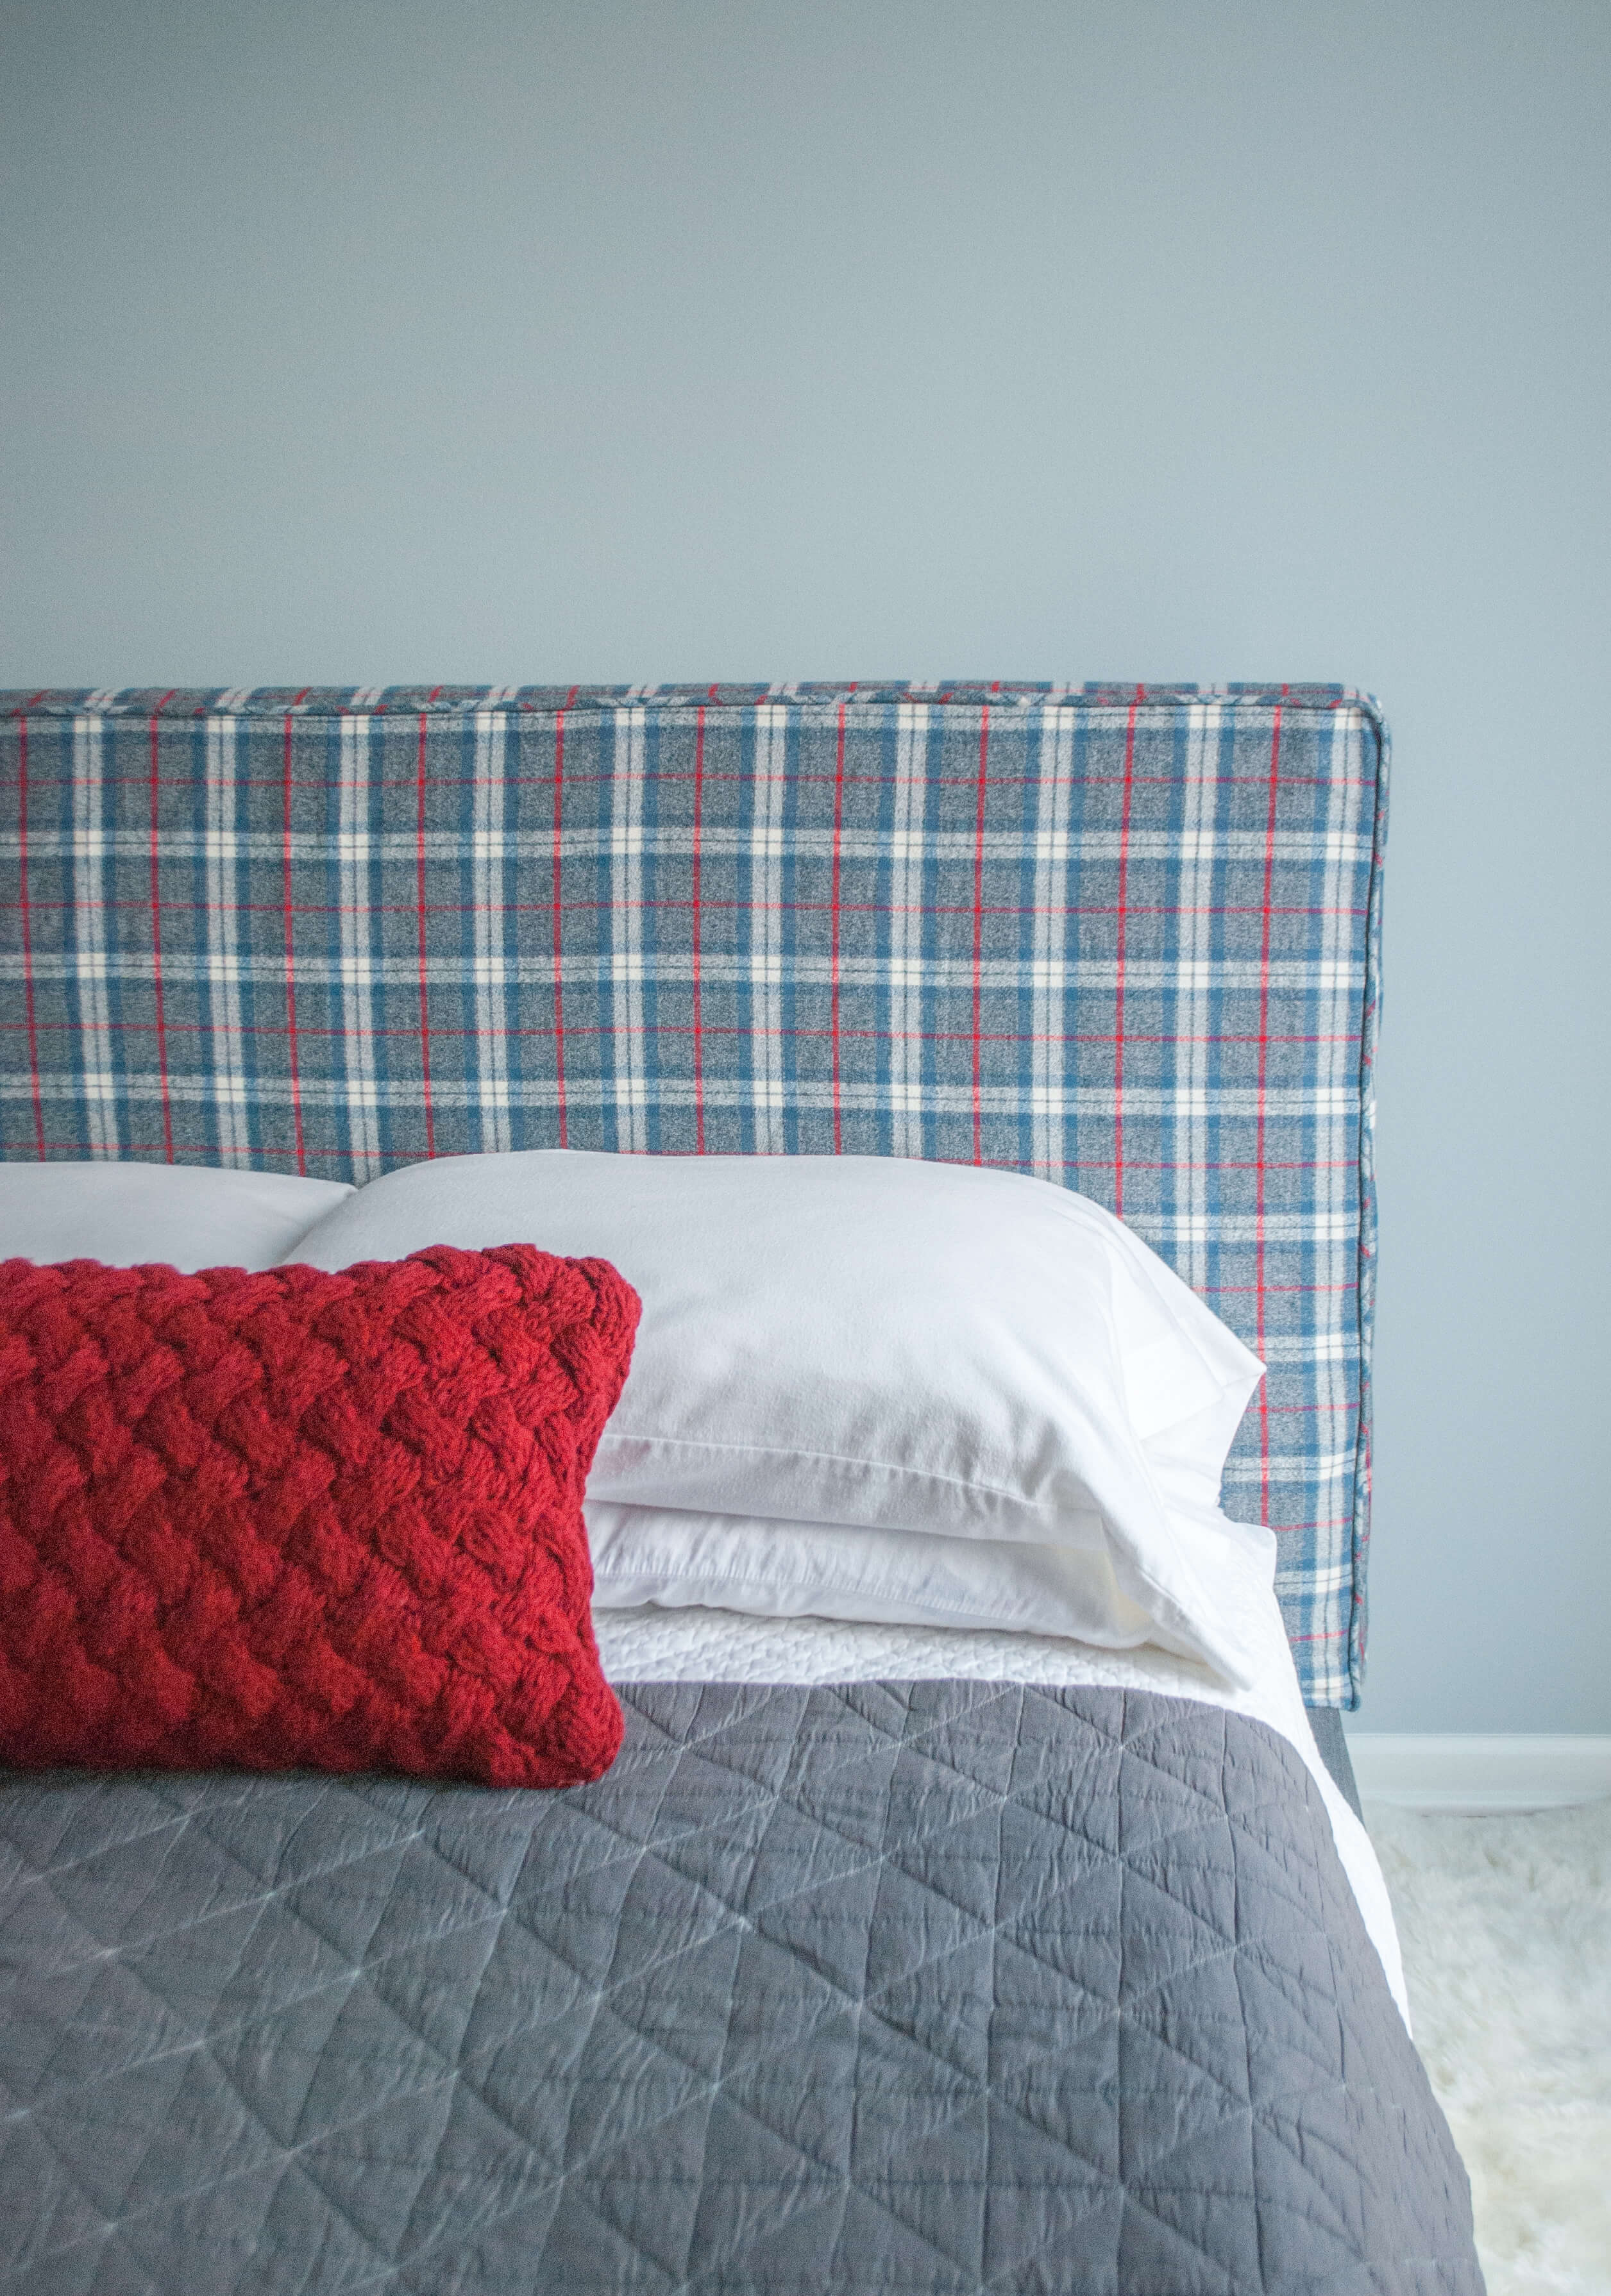 How to Make a Headboard Slipcover with No-Sew Piping (or welting). What a super easy way to change up your bedroom!